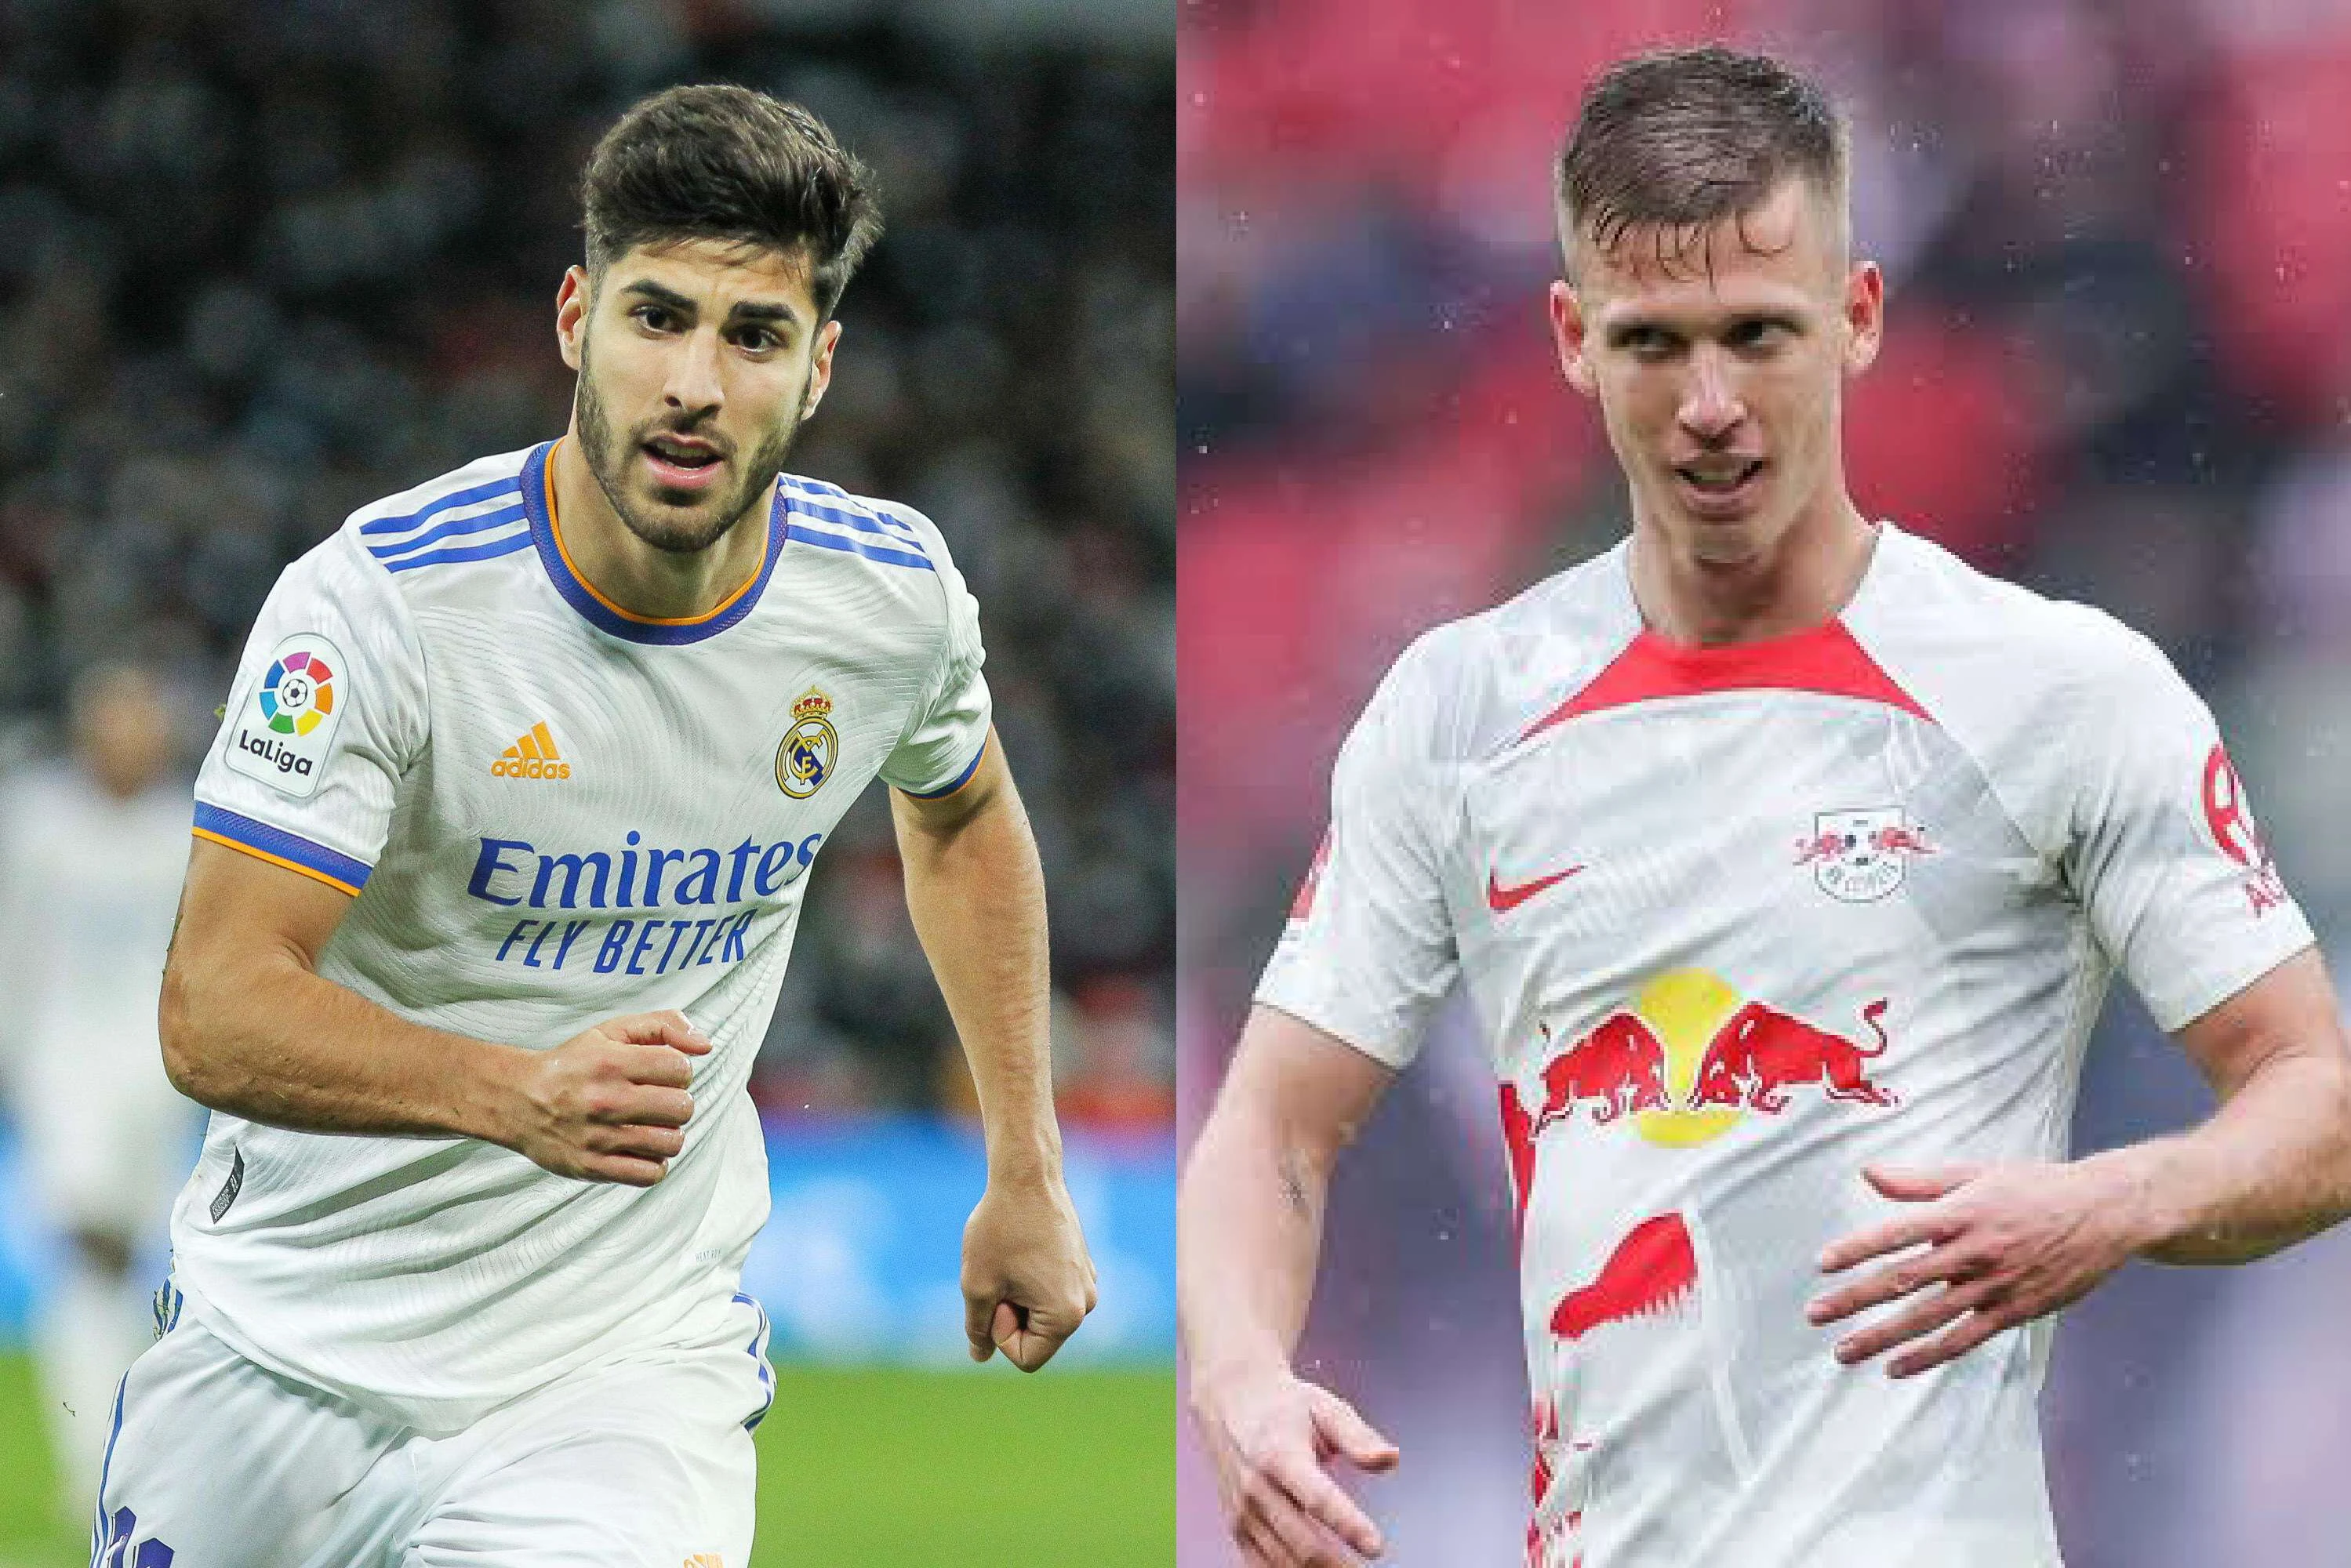 Real Madrid considering RB Leipzig forward as potential replacement for Asensio